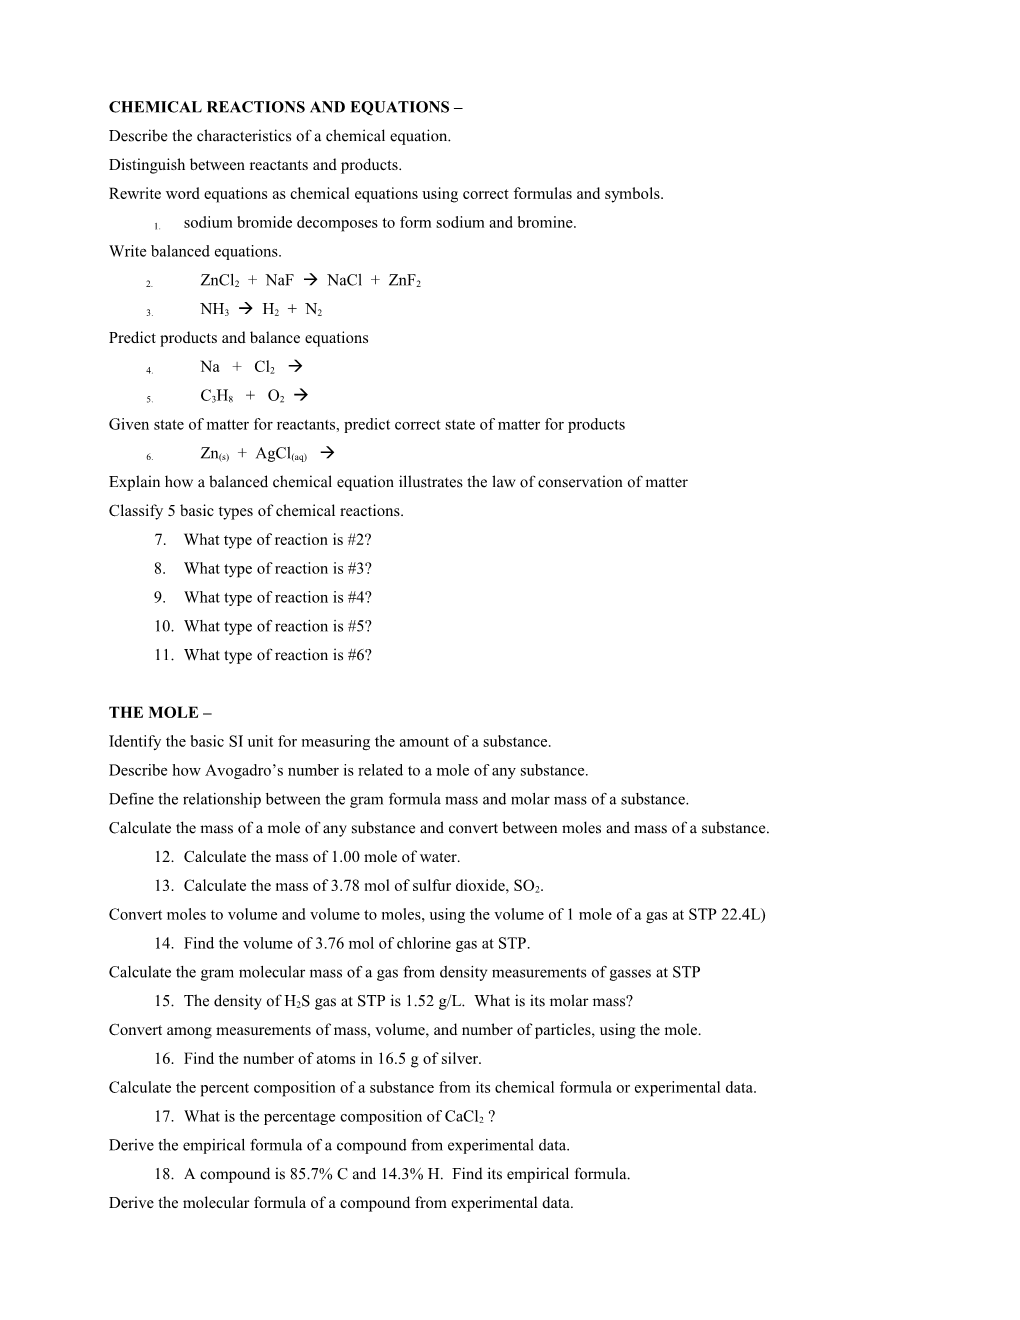 Chemical Reactions and Equations Chapter 9